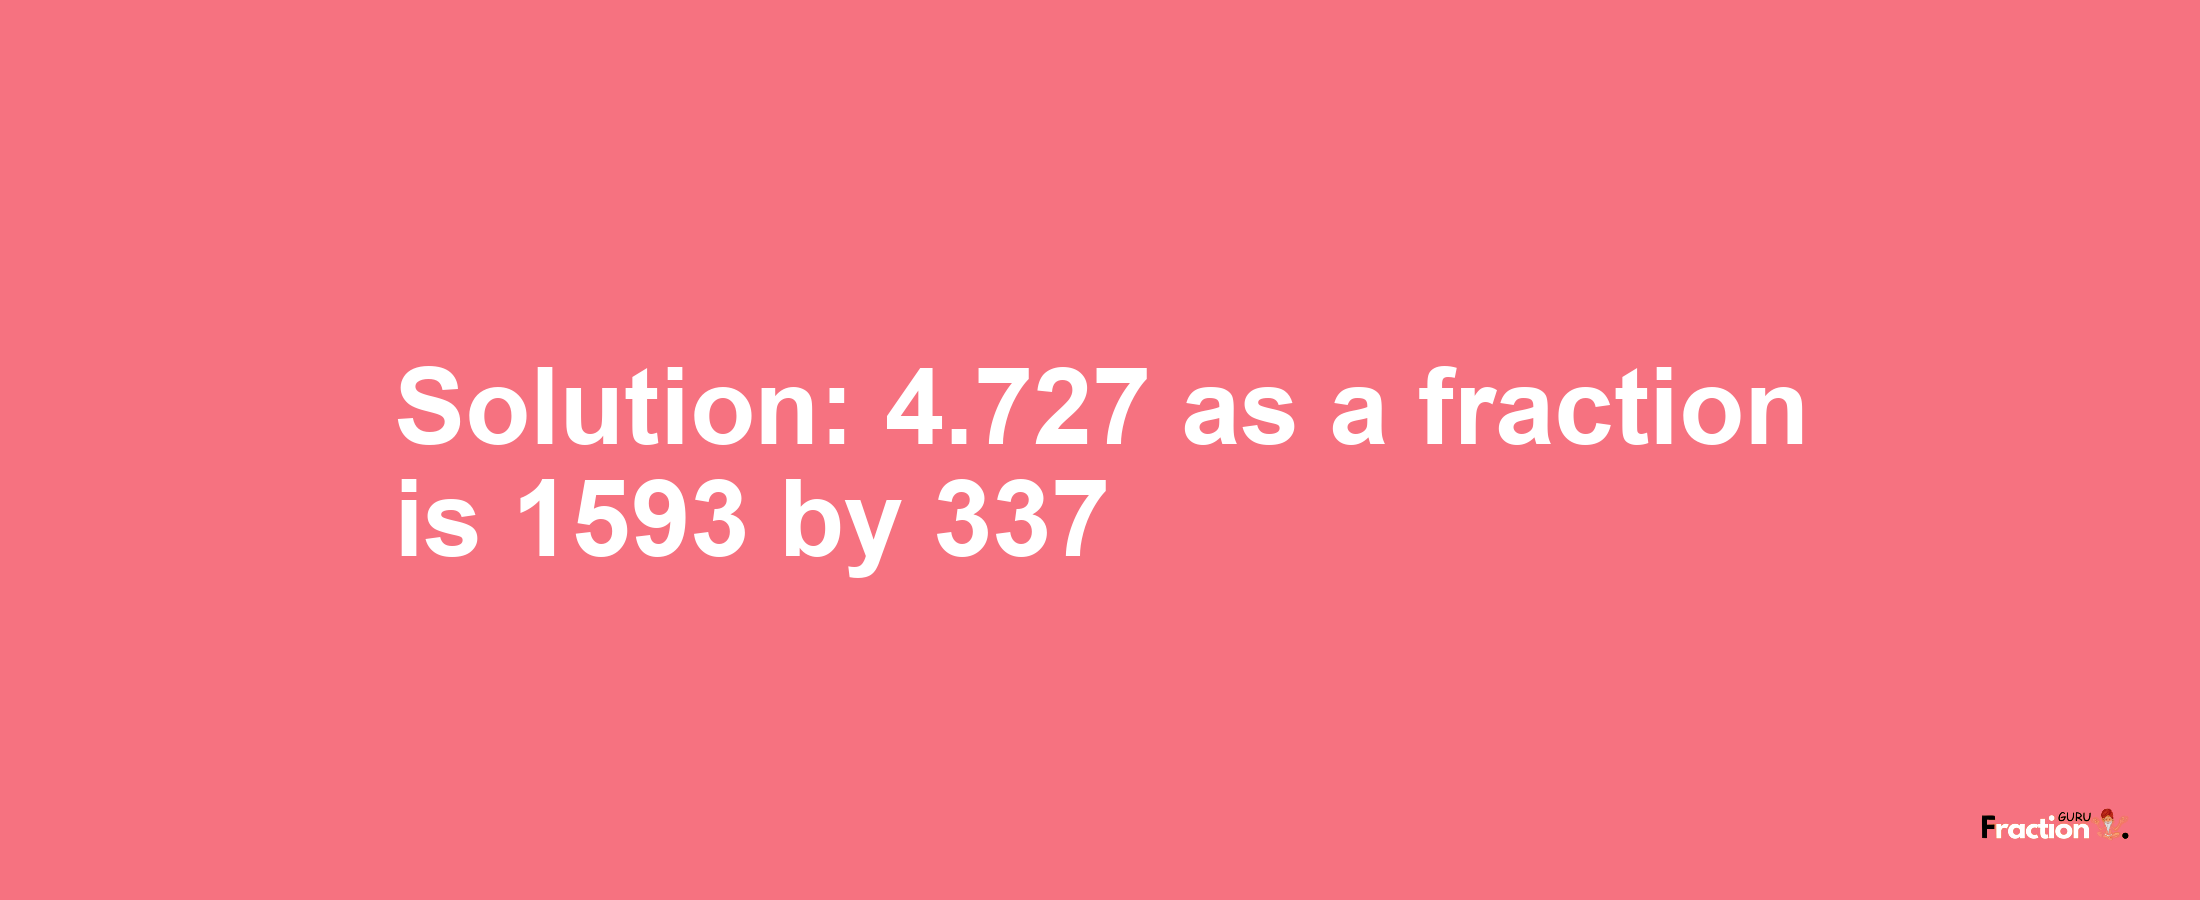 Solution:4.727 as a fraction is 1593/337